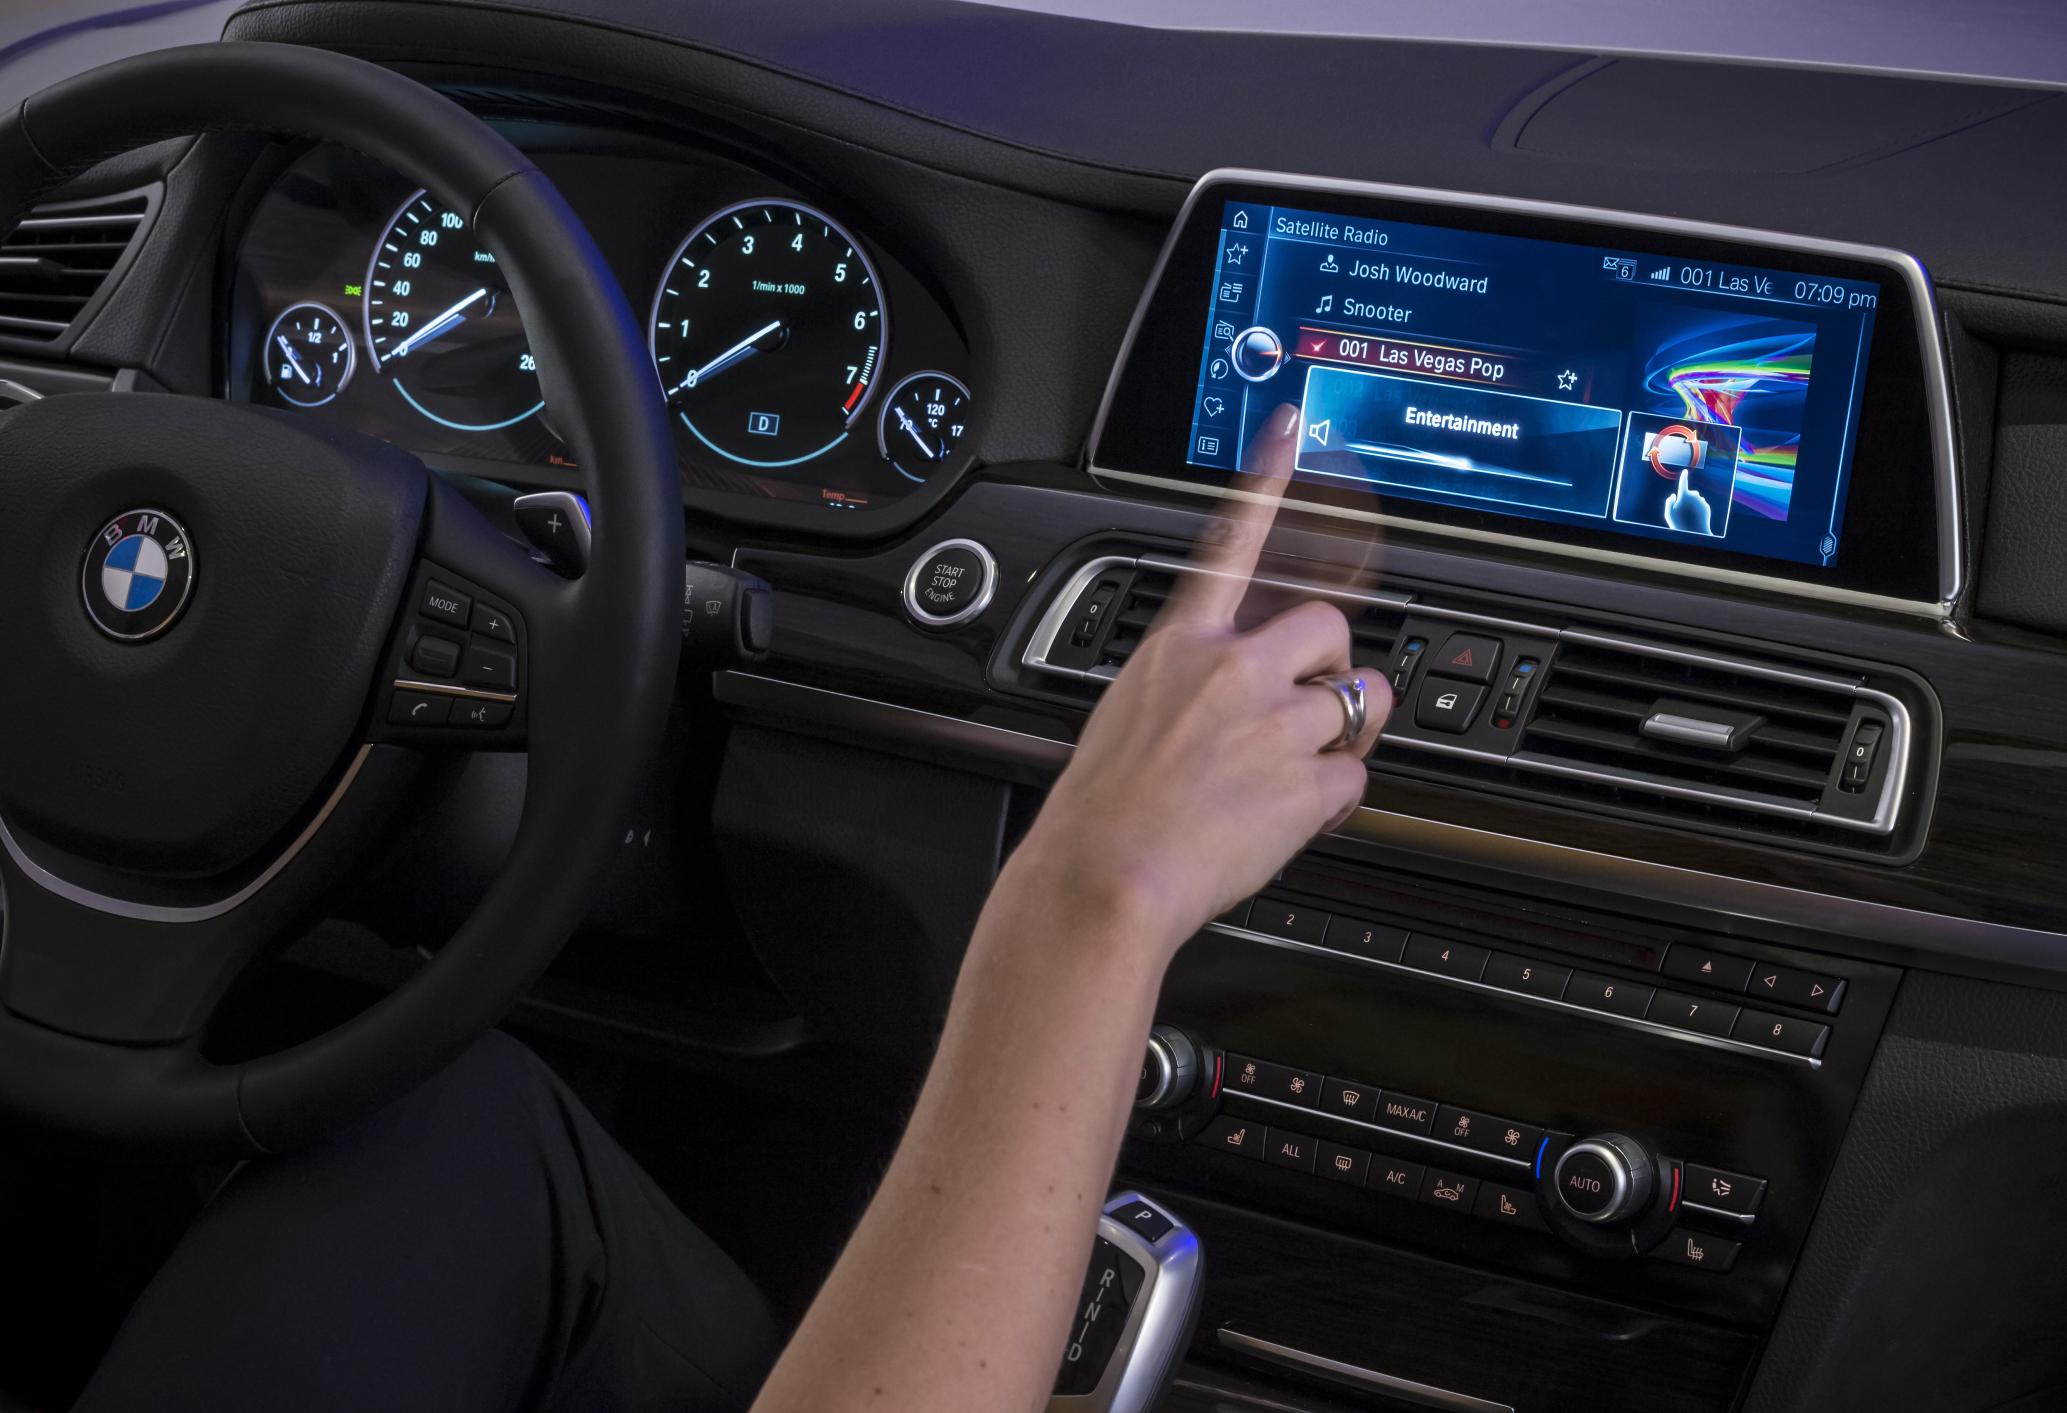 BMW to support Android Auto from next year